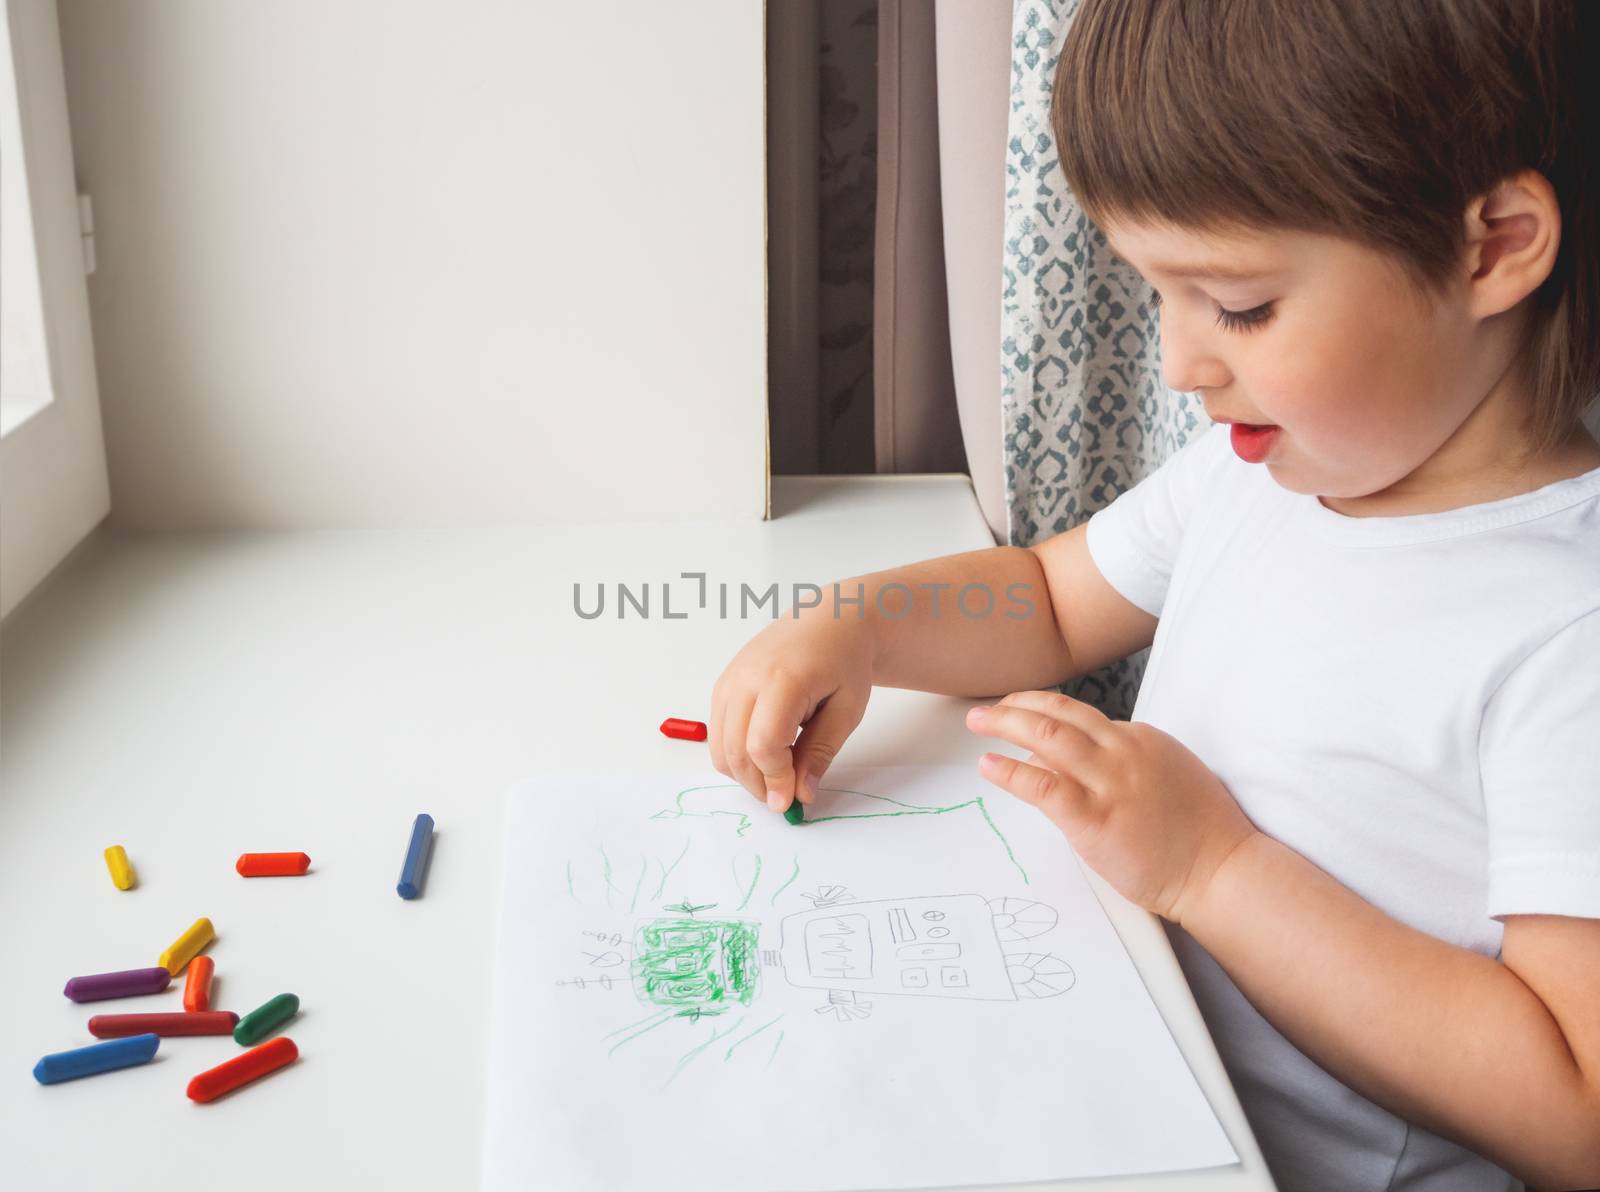 Toddler draws funny robot. Kid uses wax crayons. Smiling boy paints on paper with pencils on white windowsill.